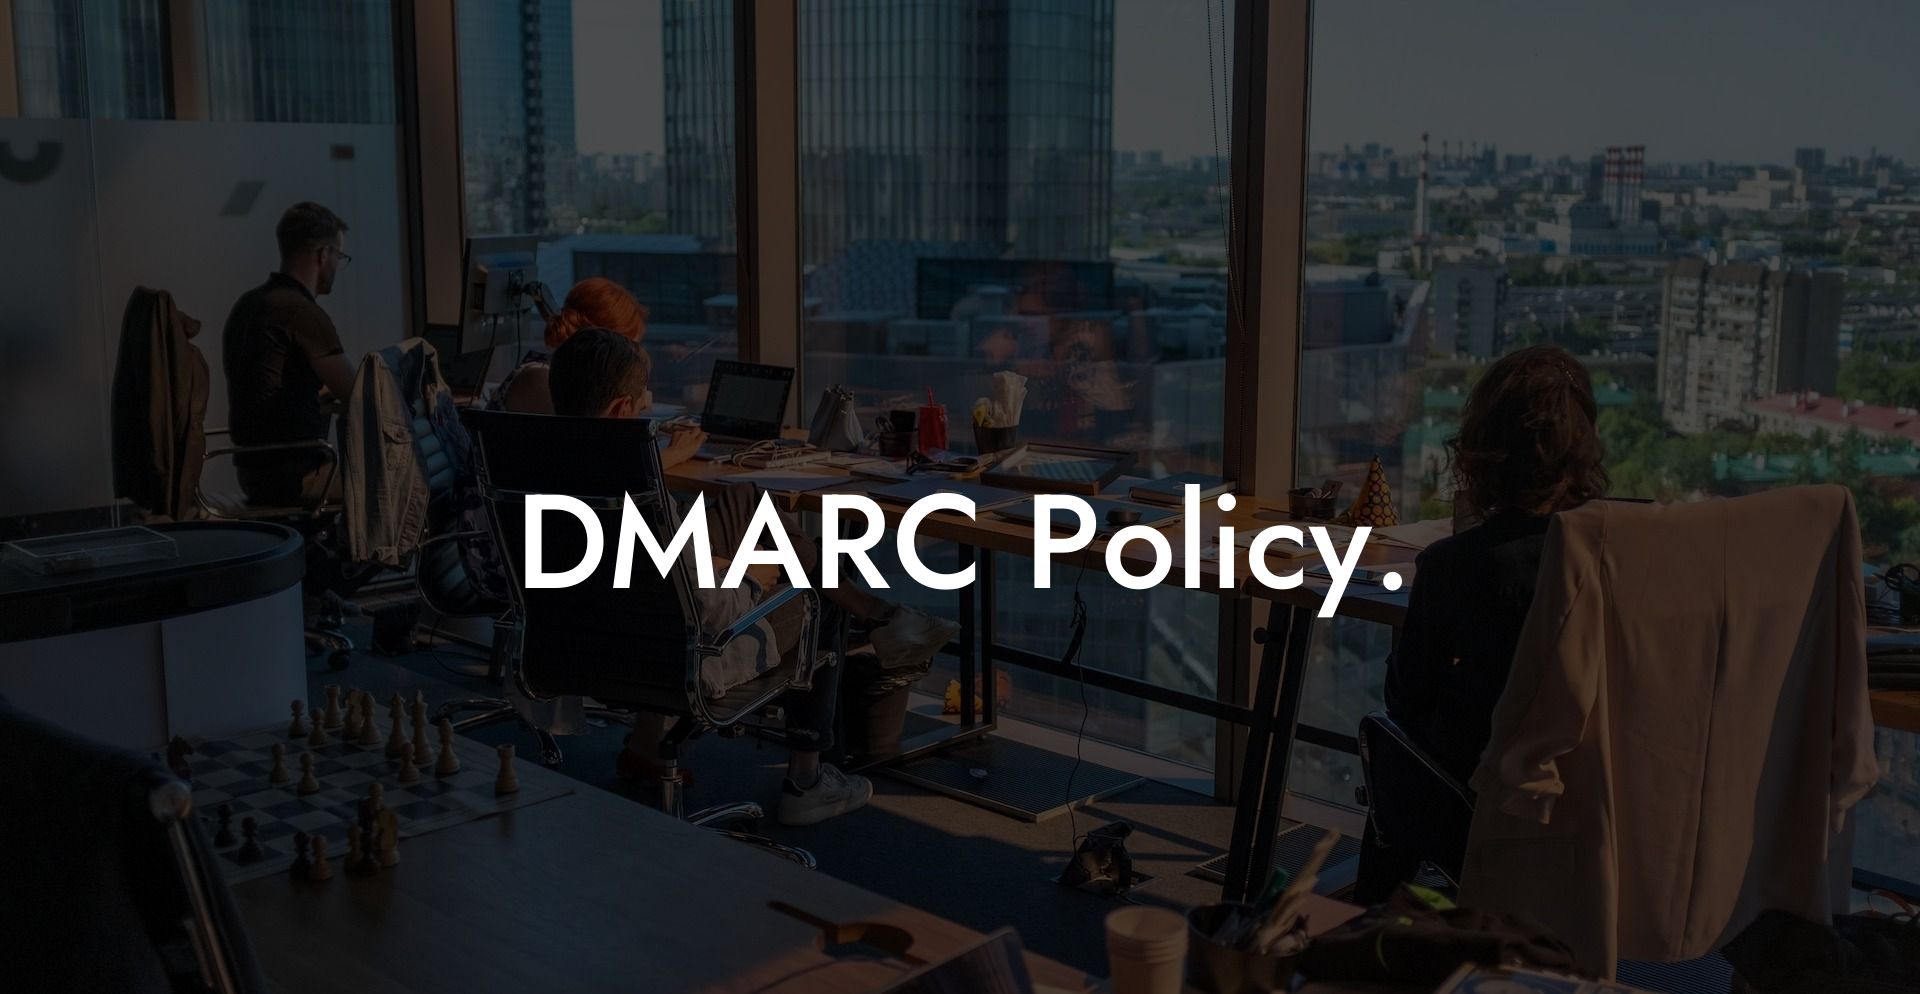 DMARC Policy.